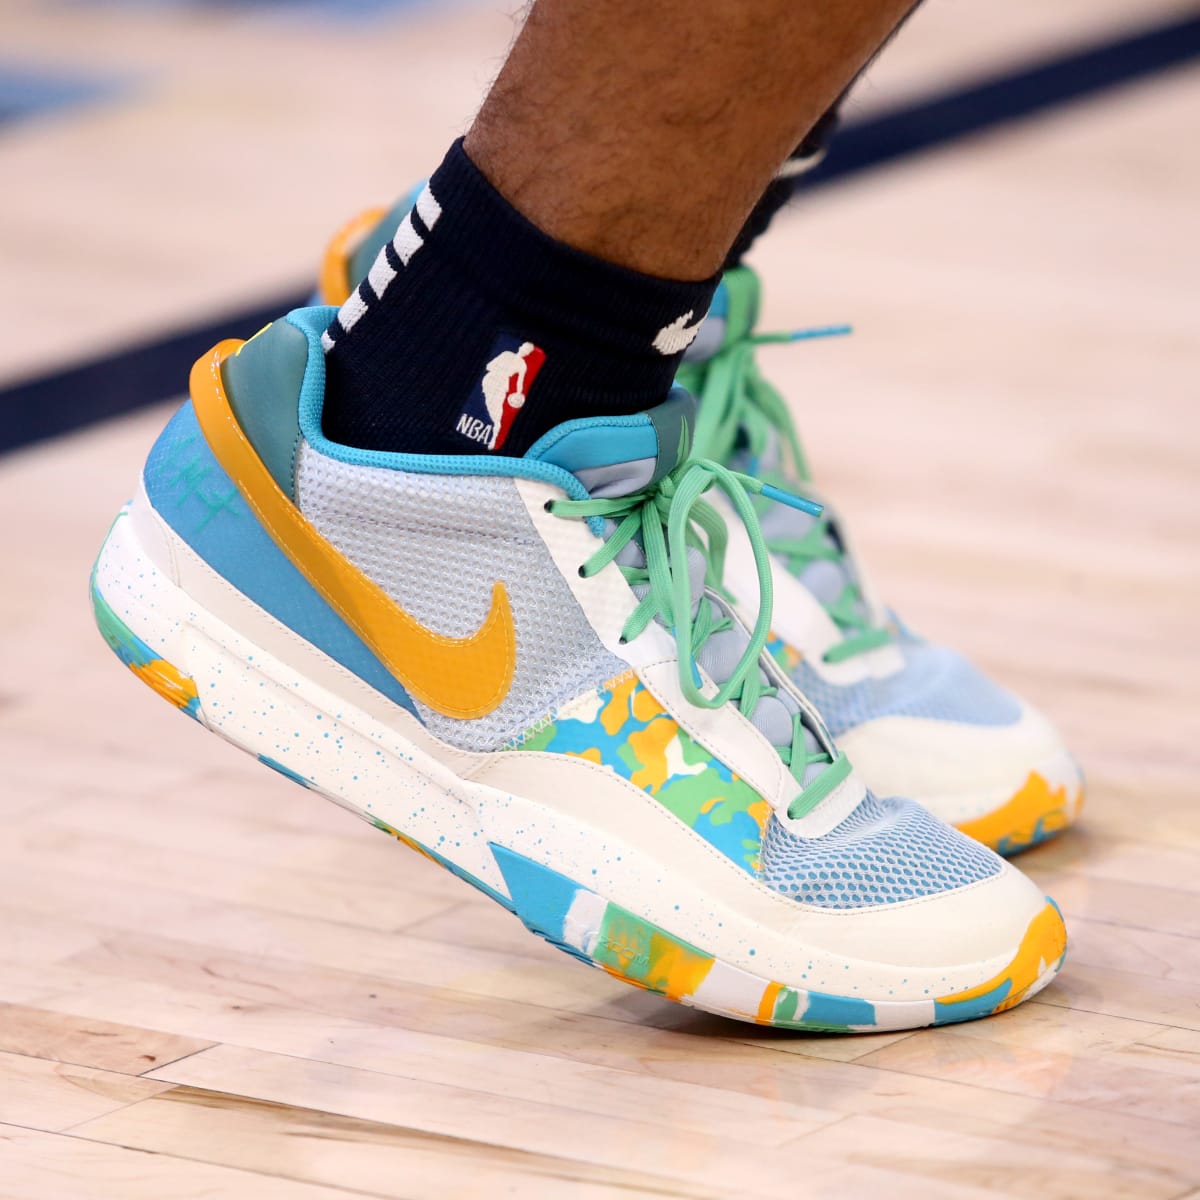 Ja Morant Debuts New Nike Ja 1 Colorway in First Game Back - Sports  Illustrated FanNation Kicks News, Analysis and More